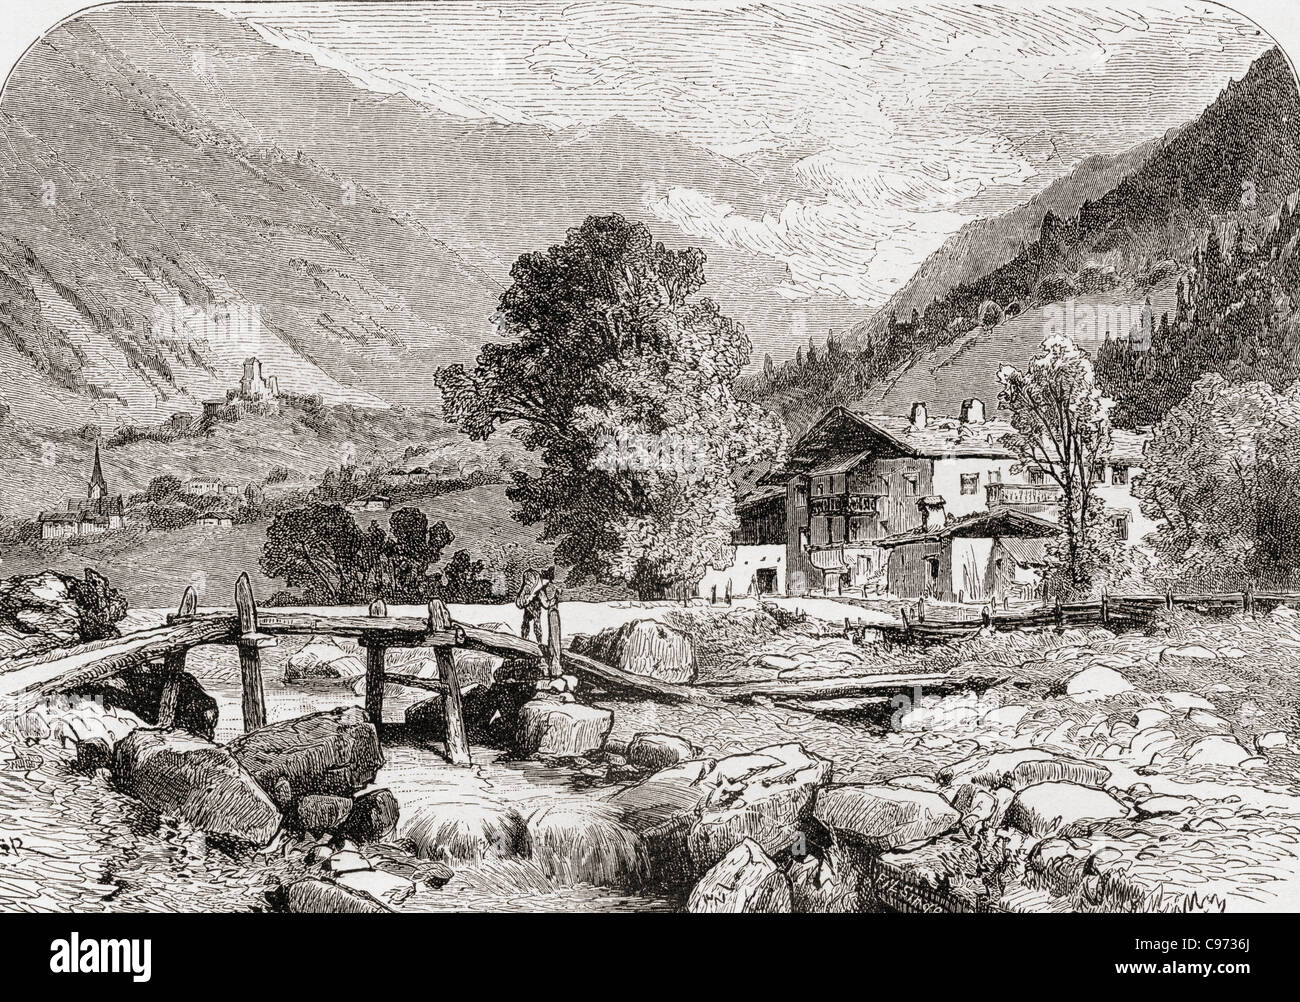 Andreas Hofer's house in St. Leonhard, Passeier, County of Tyrol, Austria in the 19th century. Stock Photo